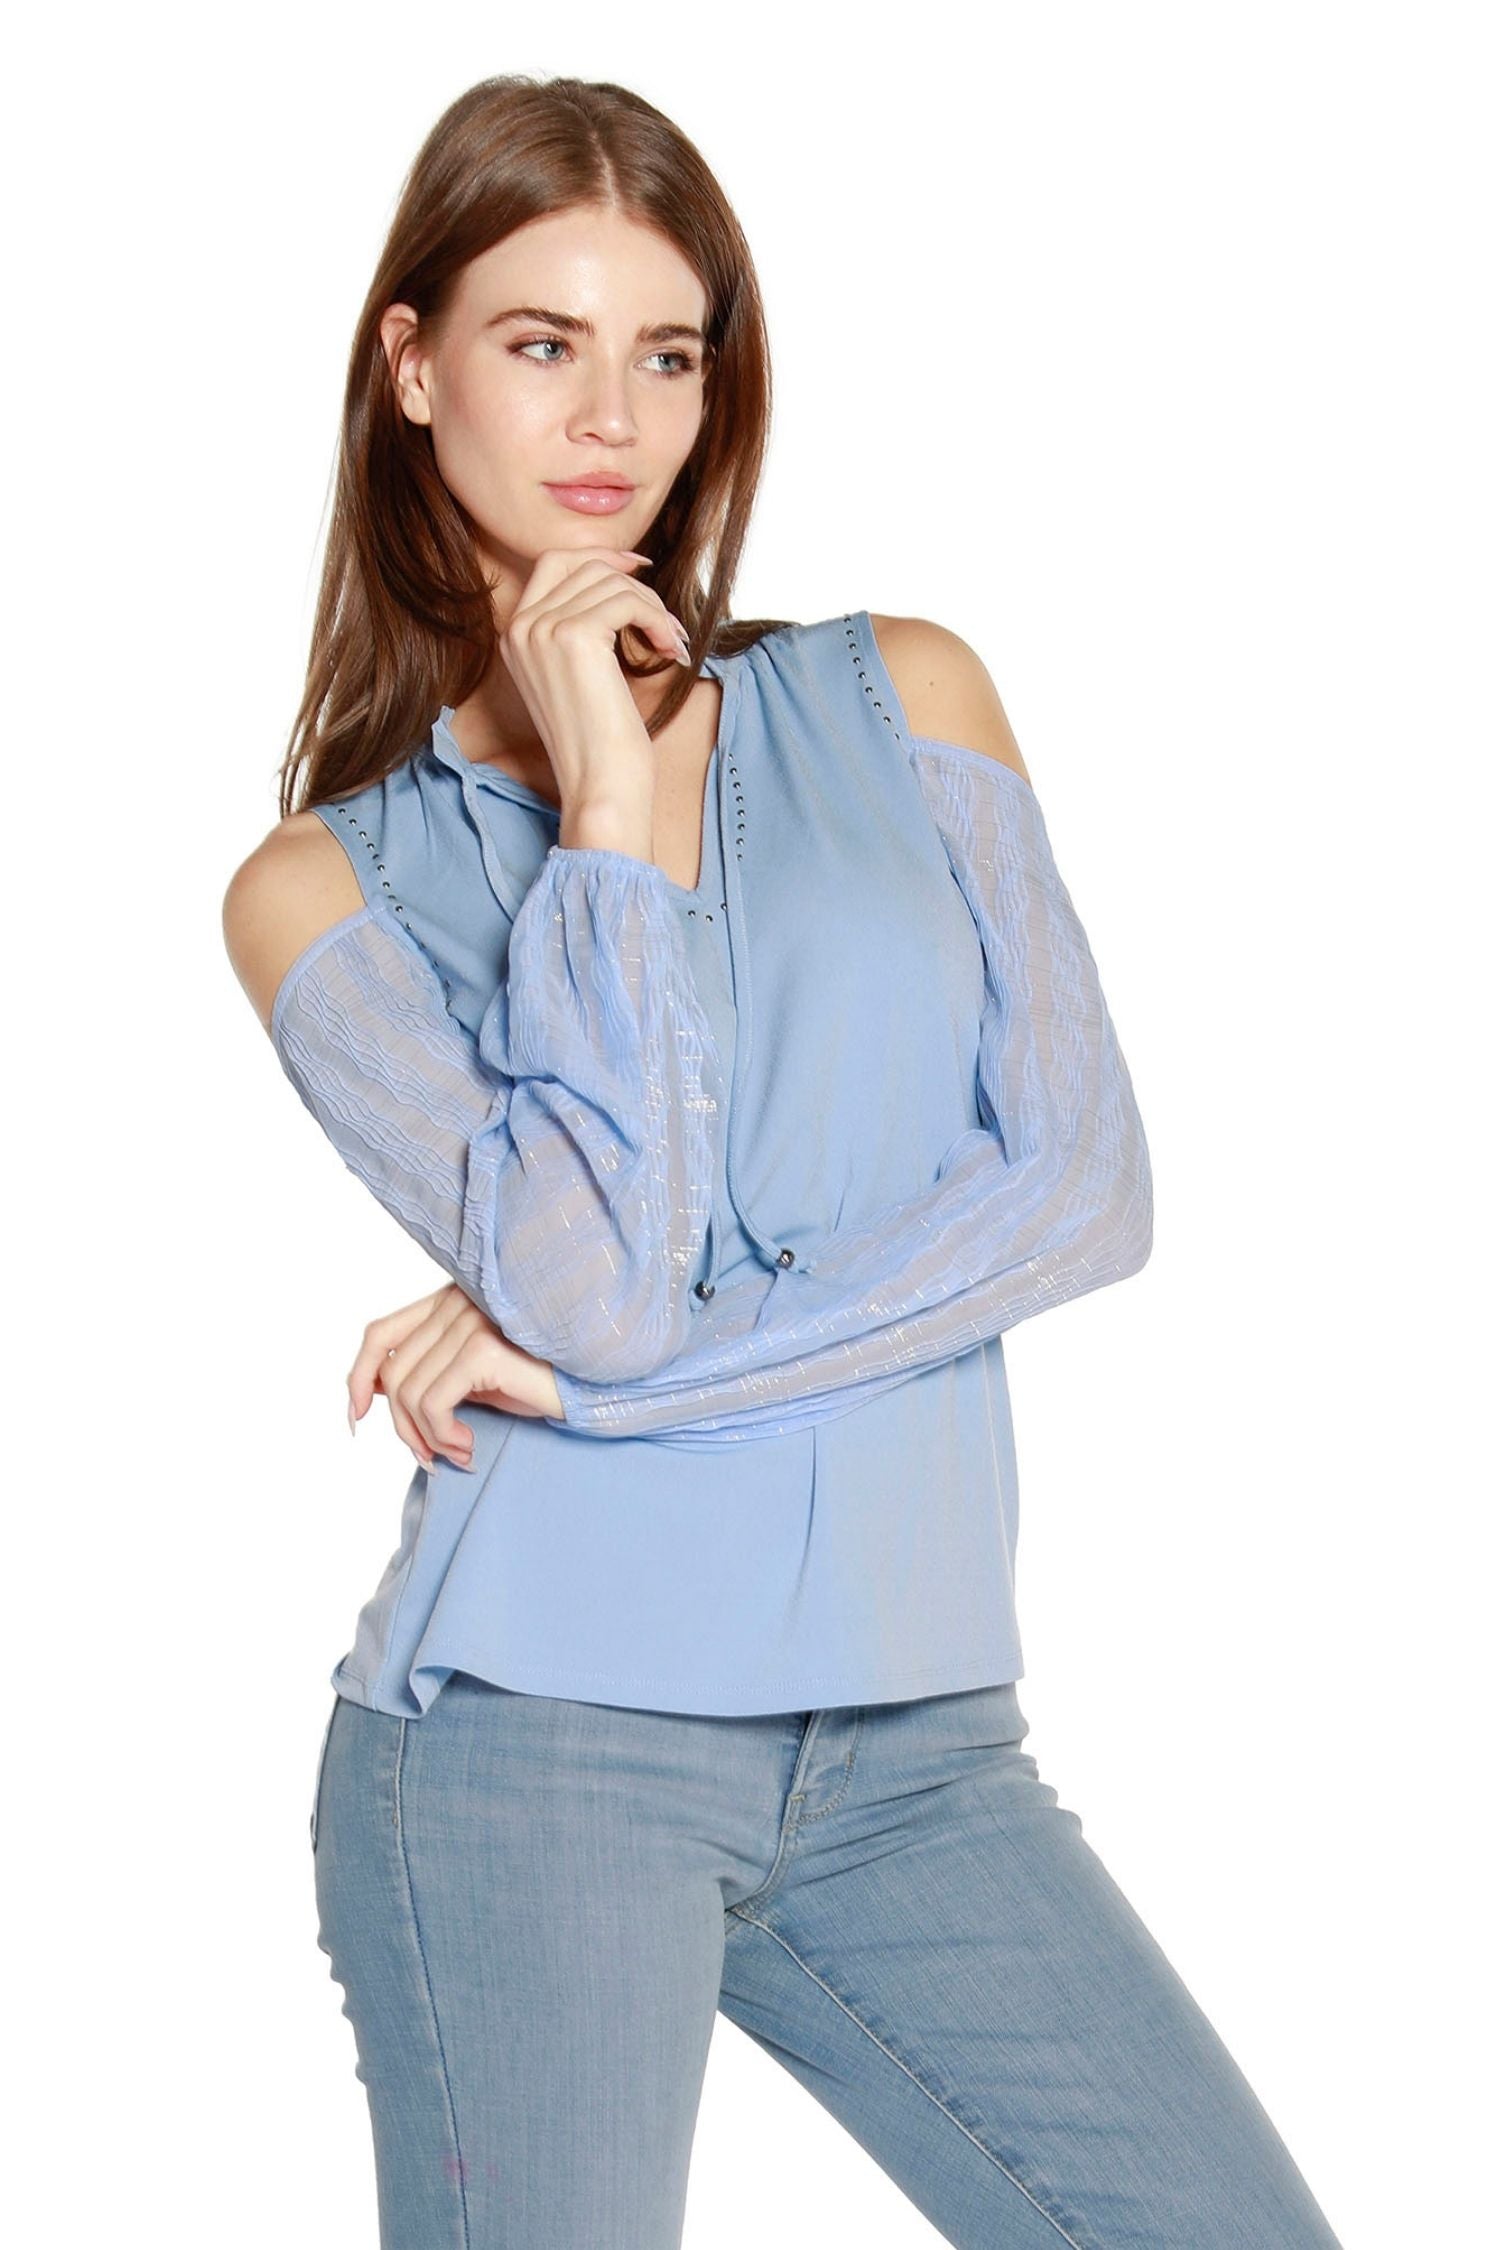 Women's Cold Shoulder Chiffon Sleeve Top with Lurex and Keyhole Neckline